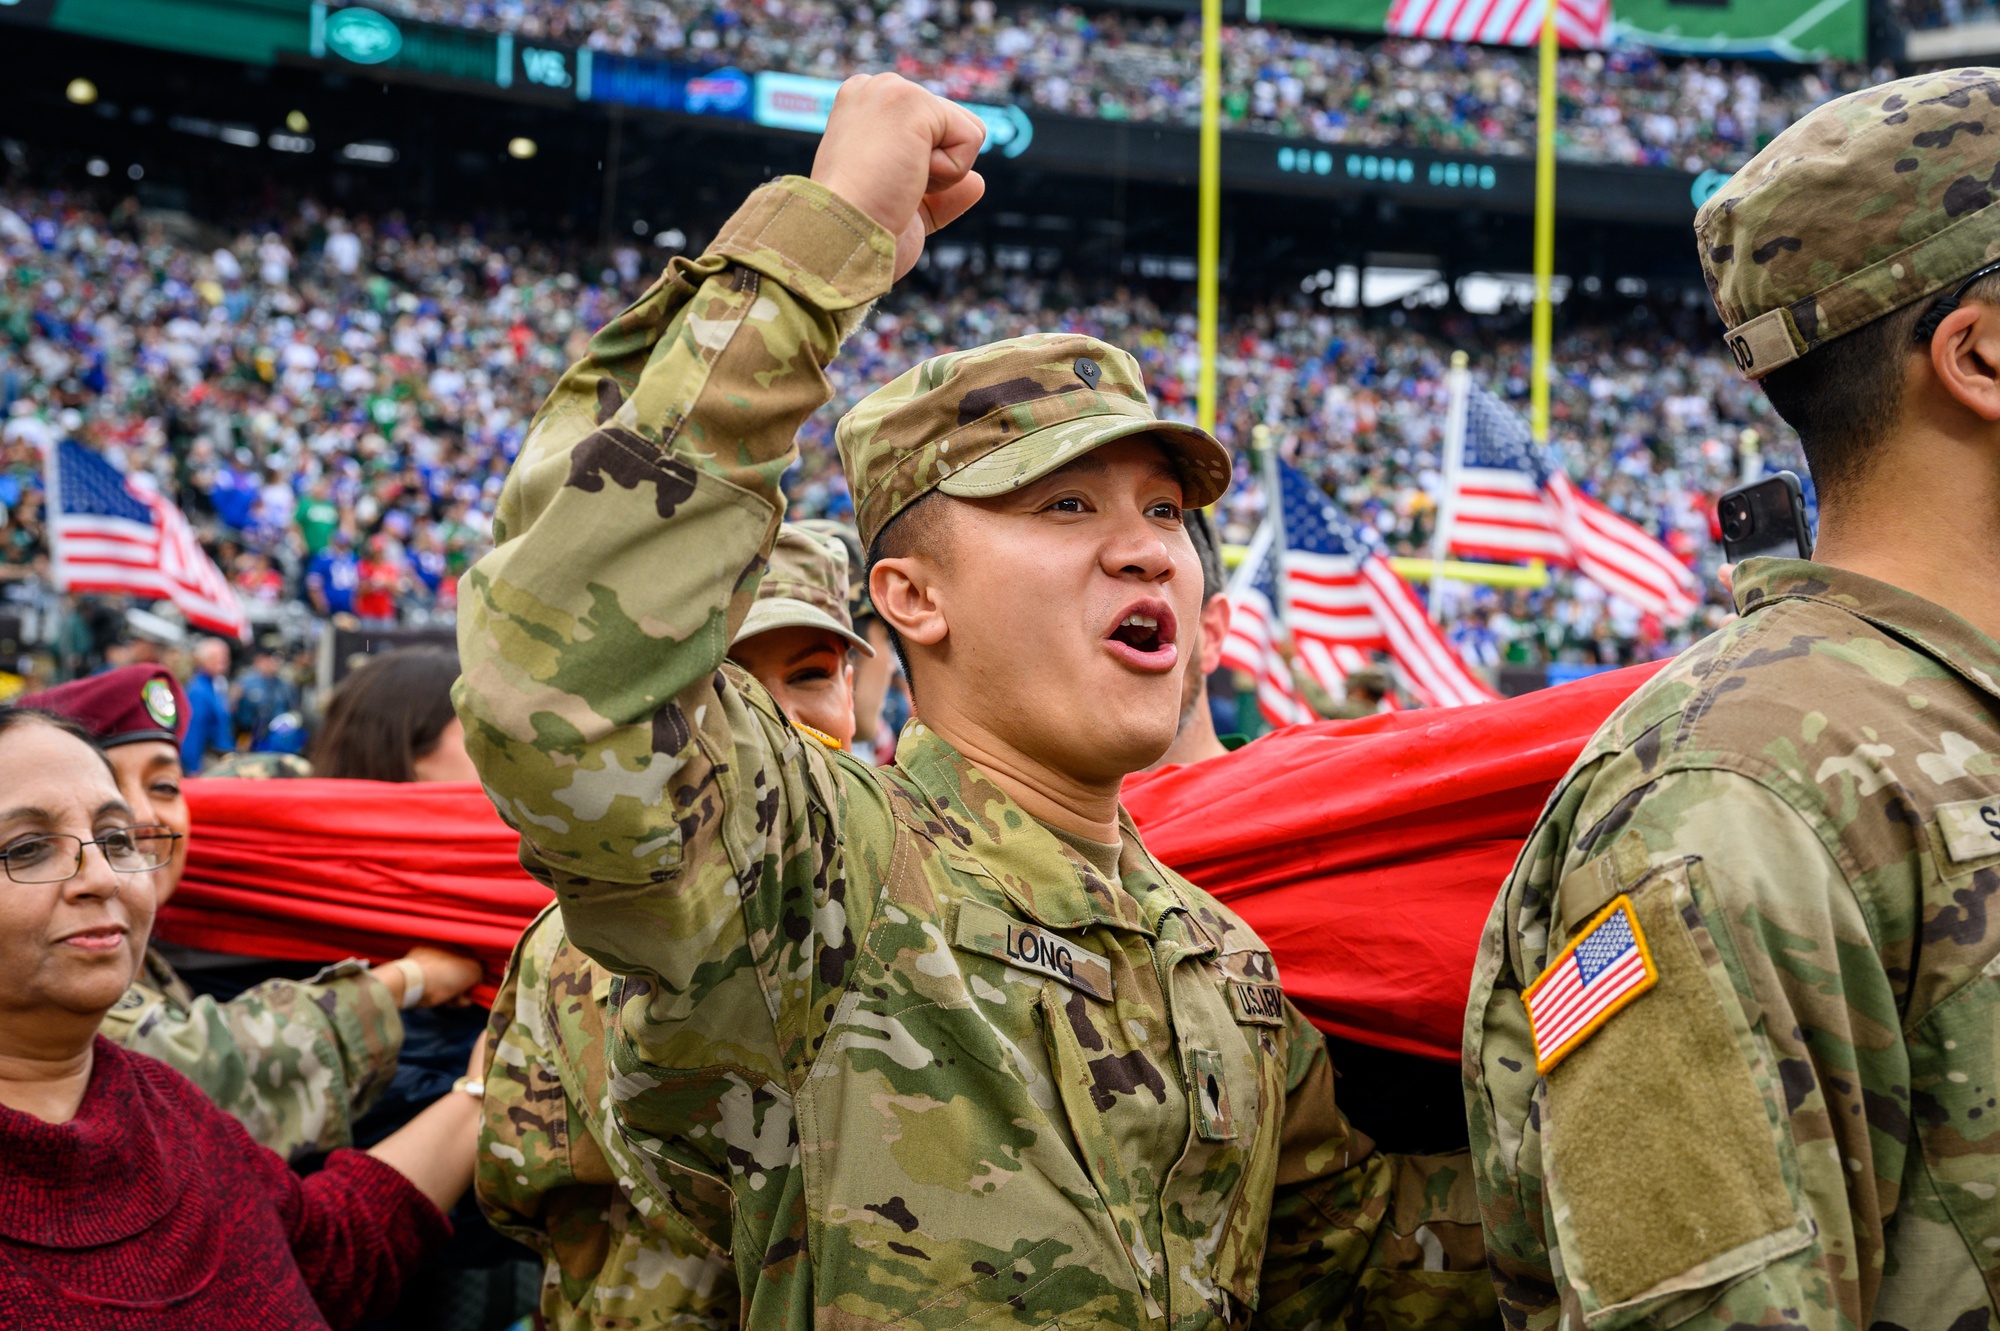 DVIDS - Images - NJNG NFL Salute to Service [Image 15 of 19]